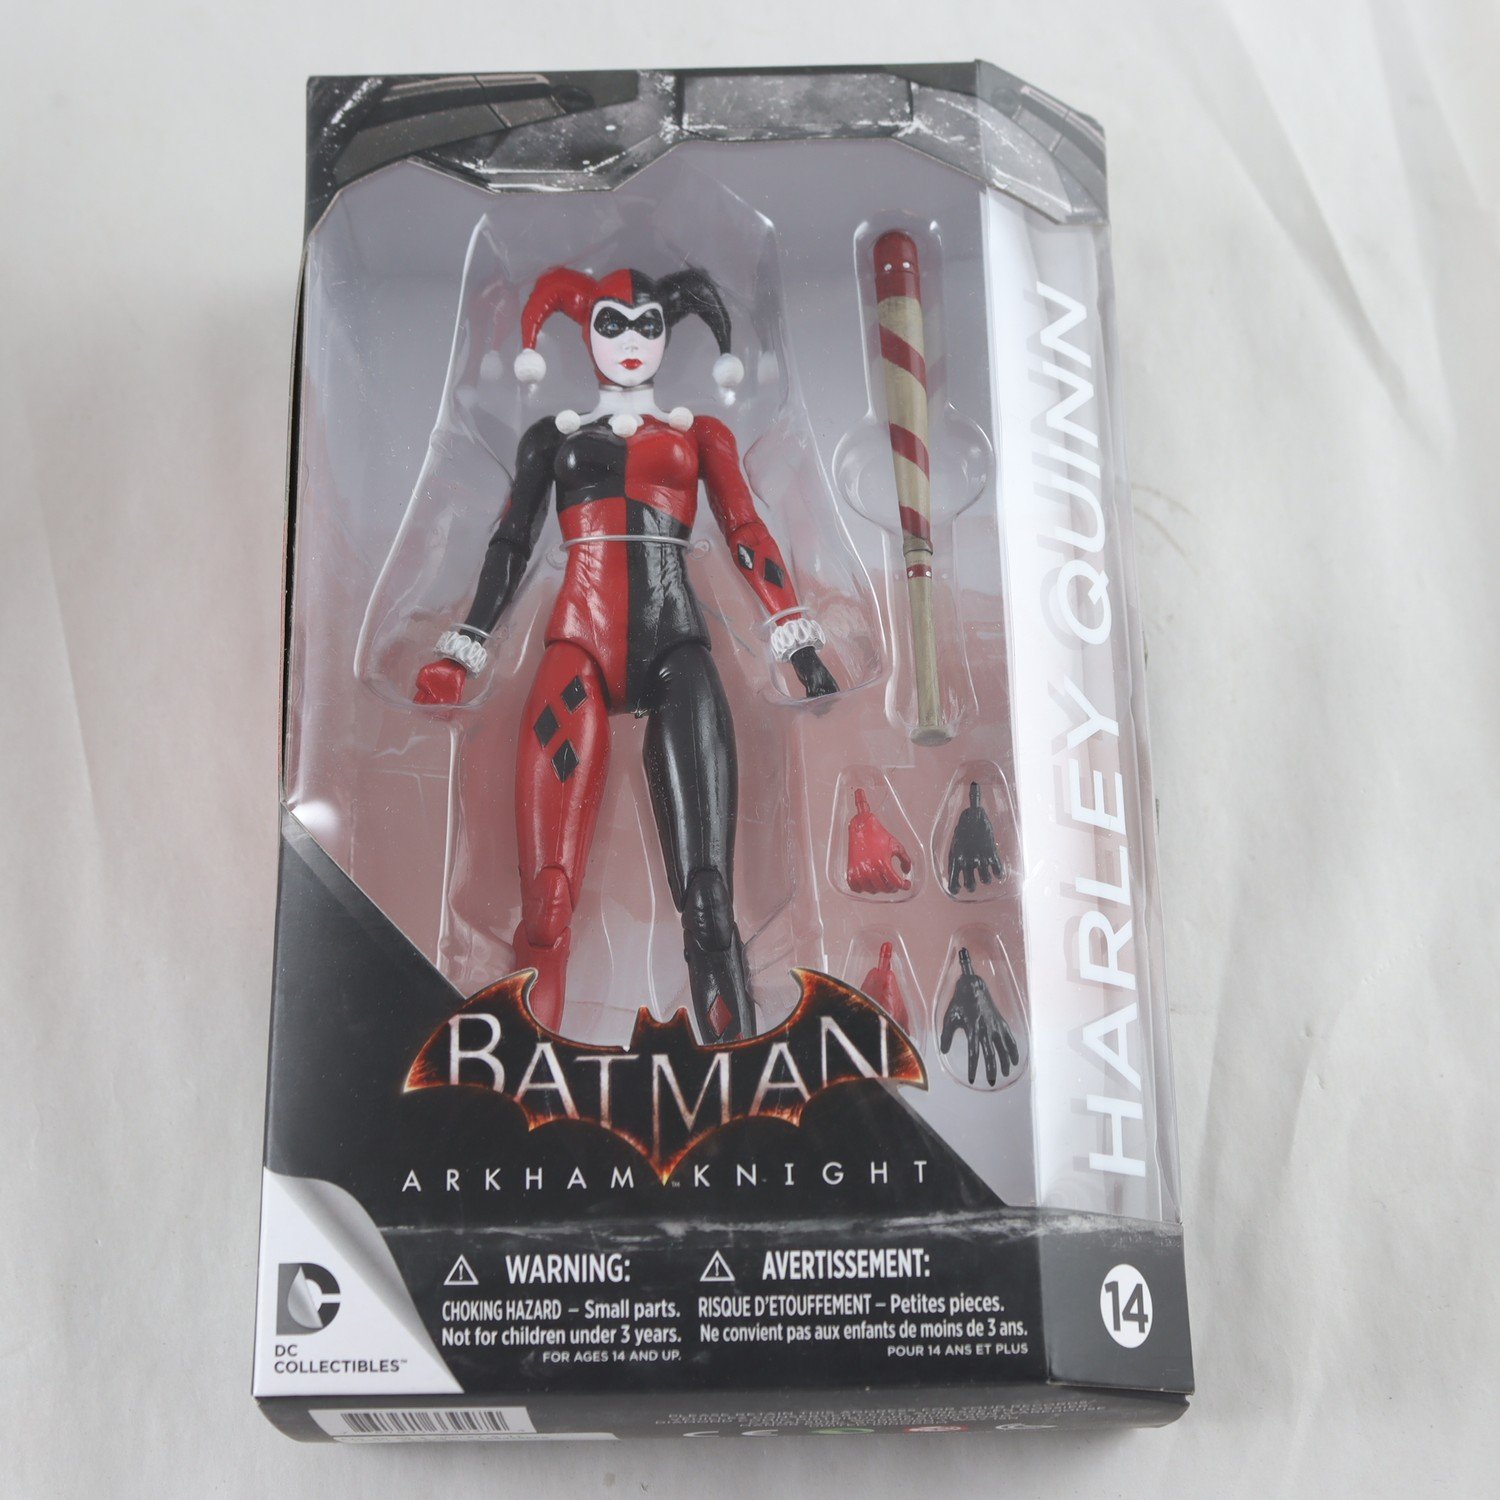 Figur, Harley quinn, dc collection, i org ask.